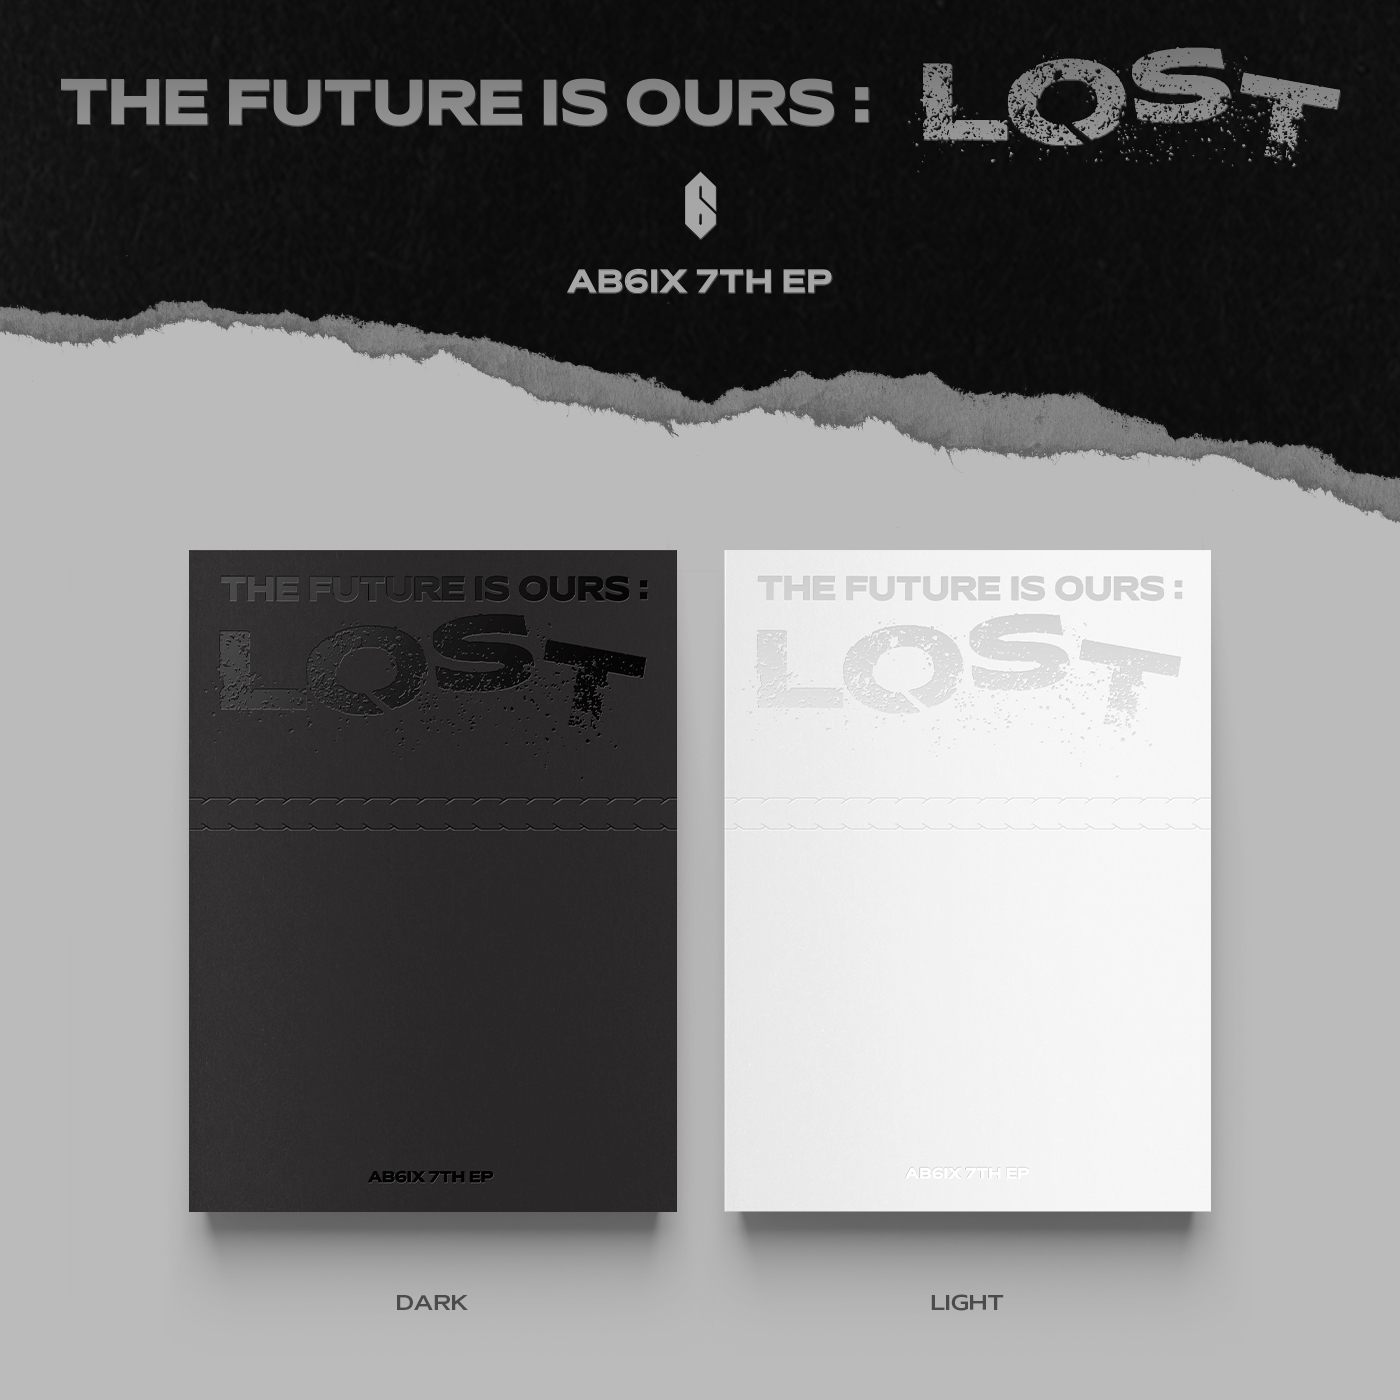 AB6IX 7TH EP「THE FUTURE IS OURS :  LOST」タワーレコード渋谷店/梅田NU茶屋町店イベント詳細決定！対象店舗限定特典も決定！！ | AB6IX JAPAN OFFICIAL  FANCLUB